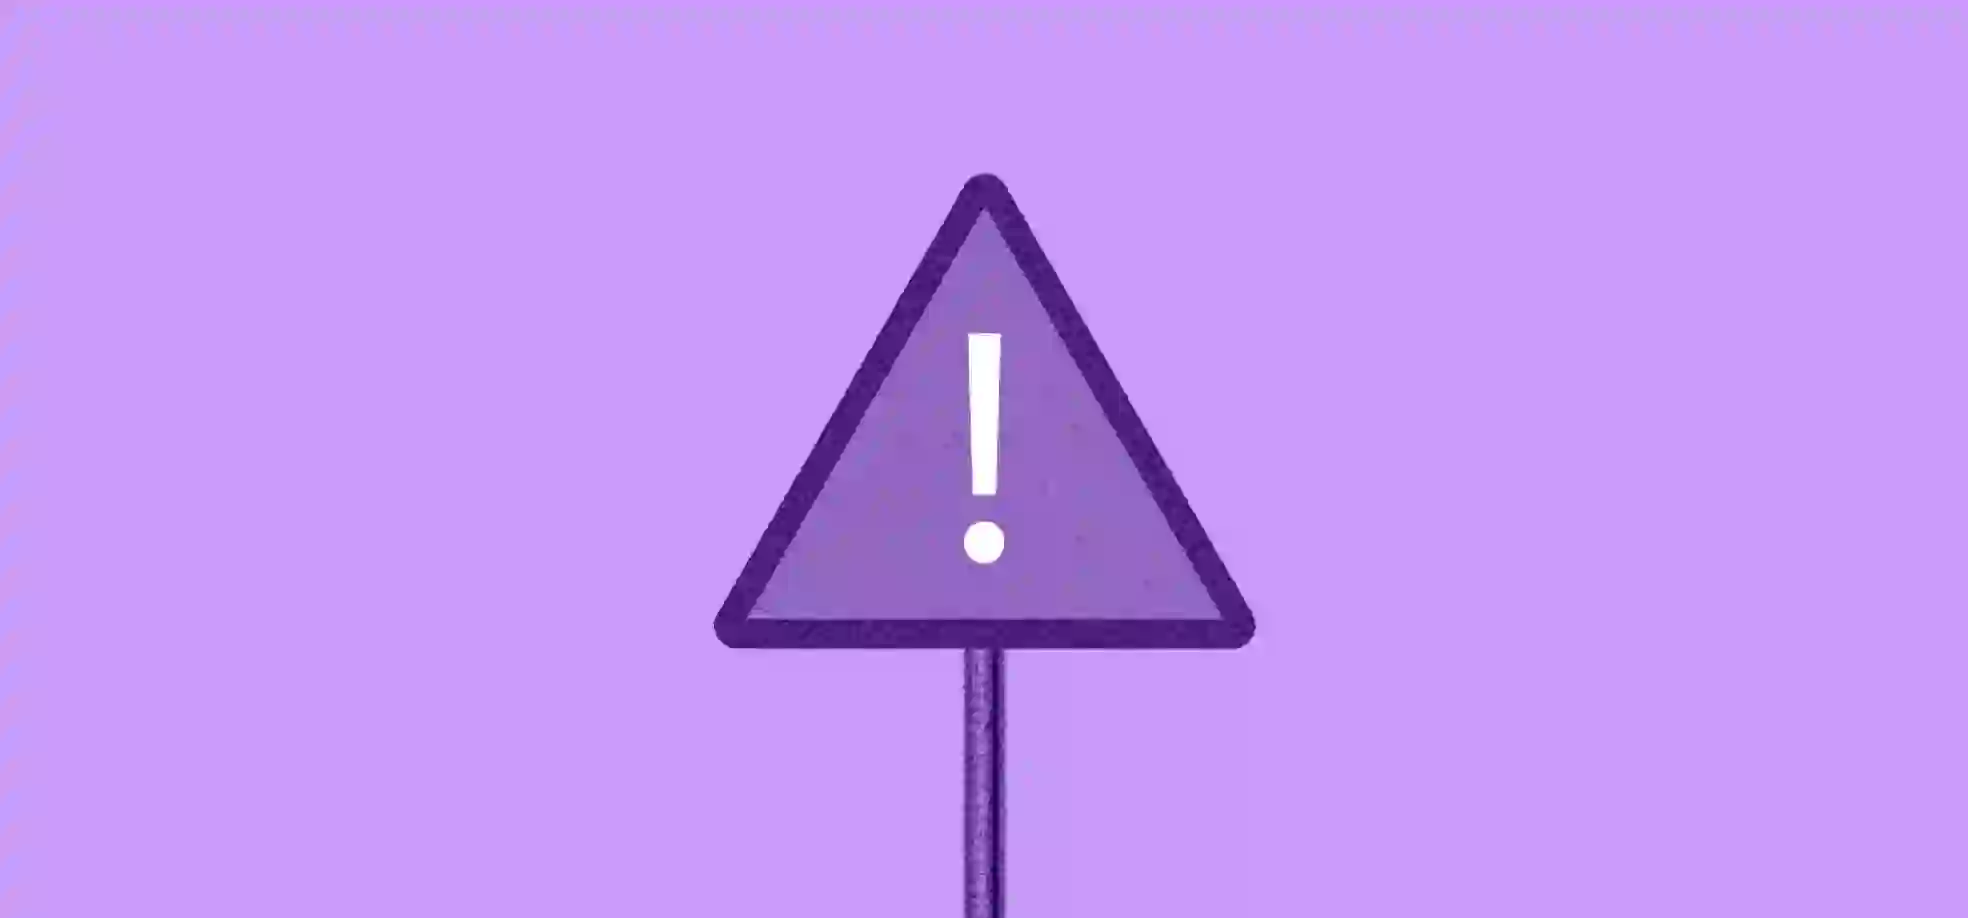 a warning sign on a purple background